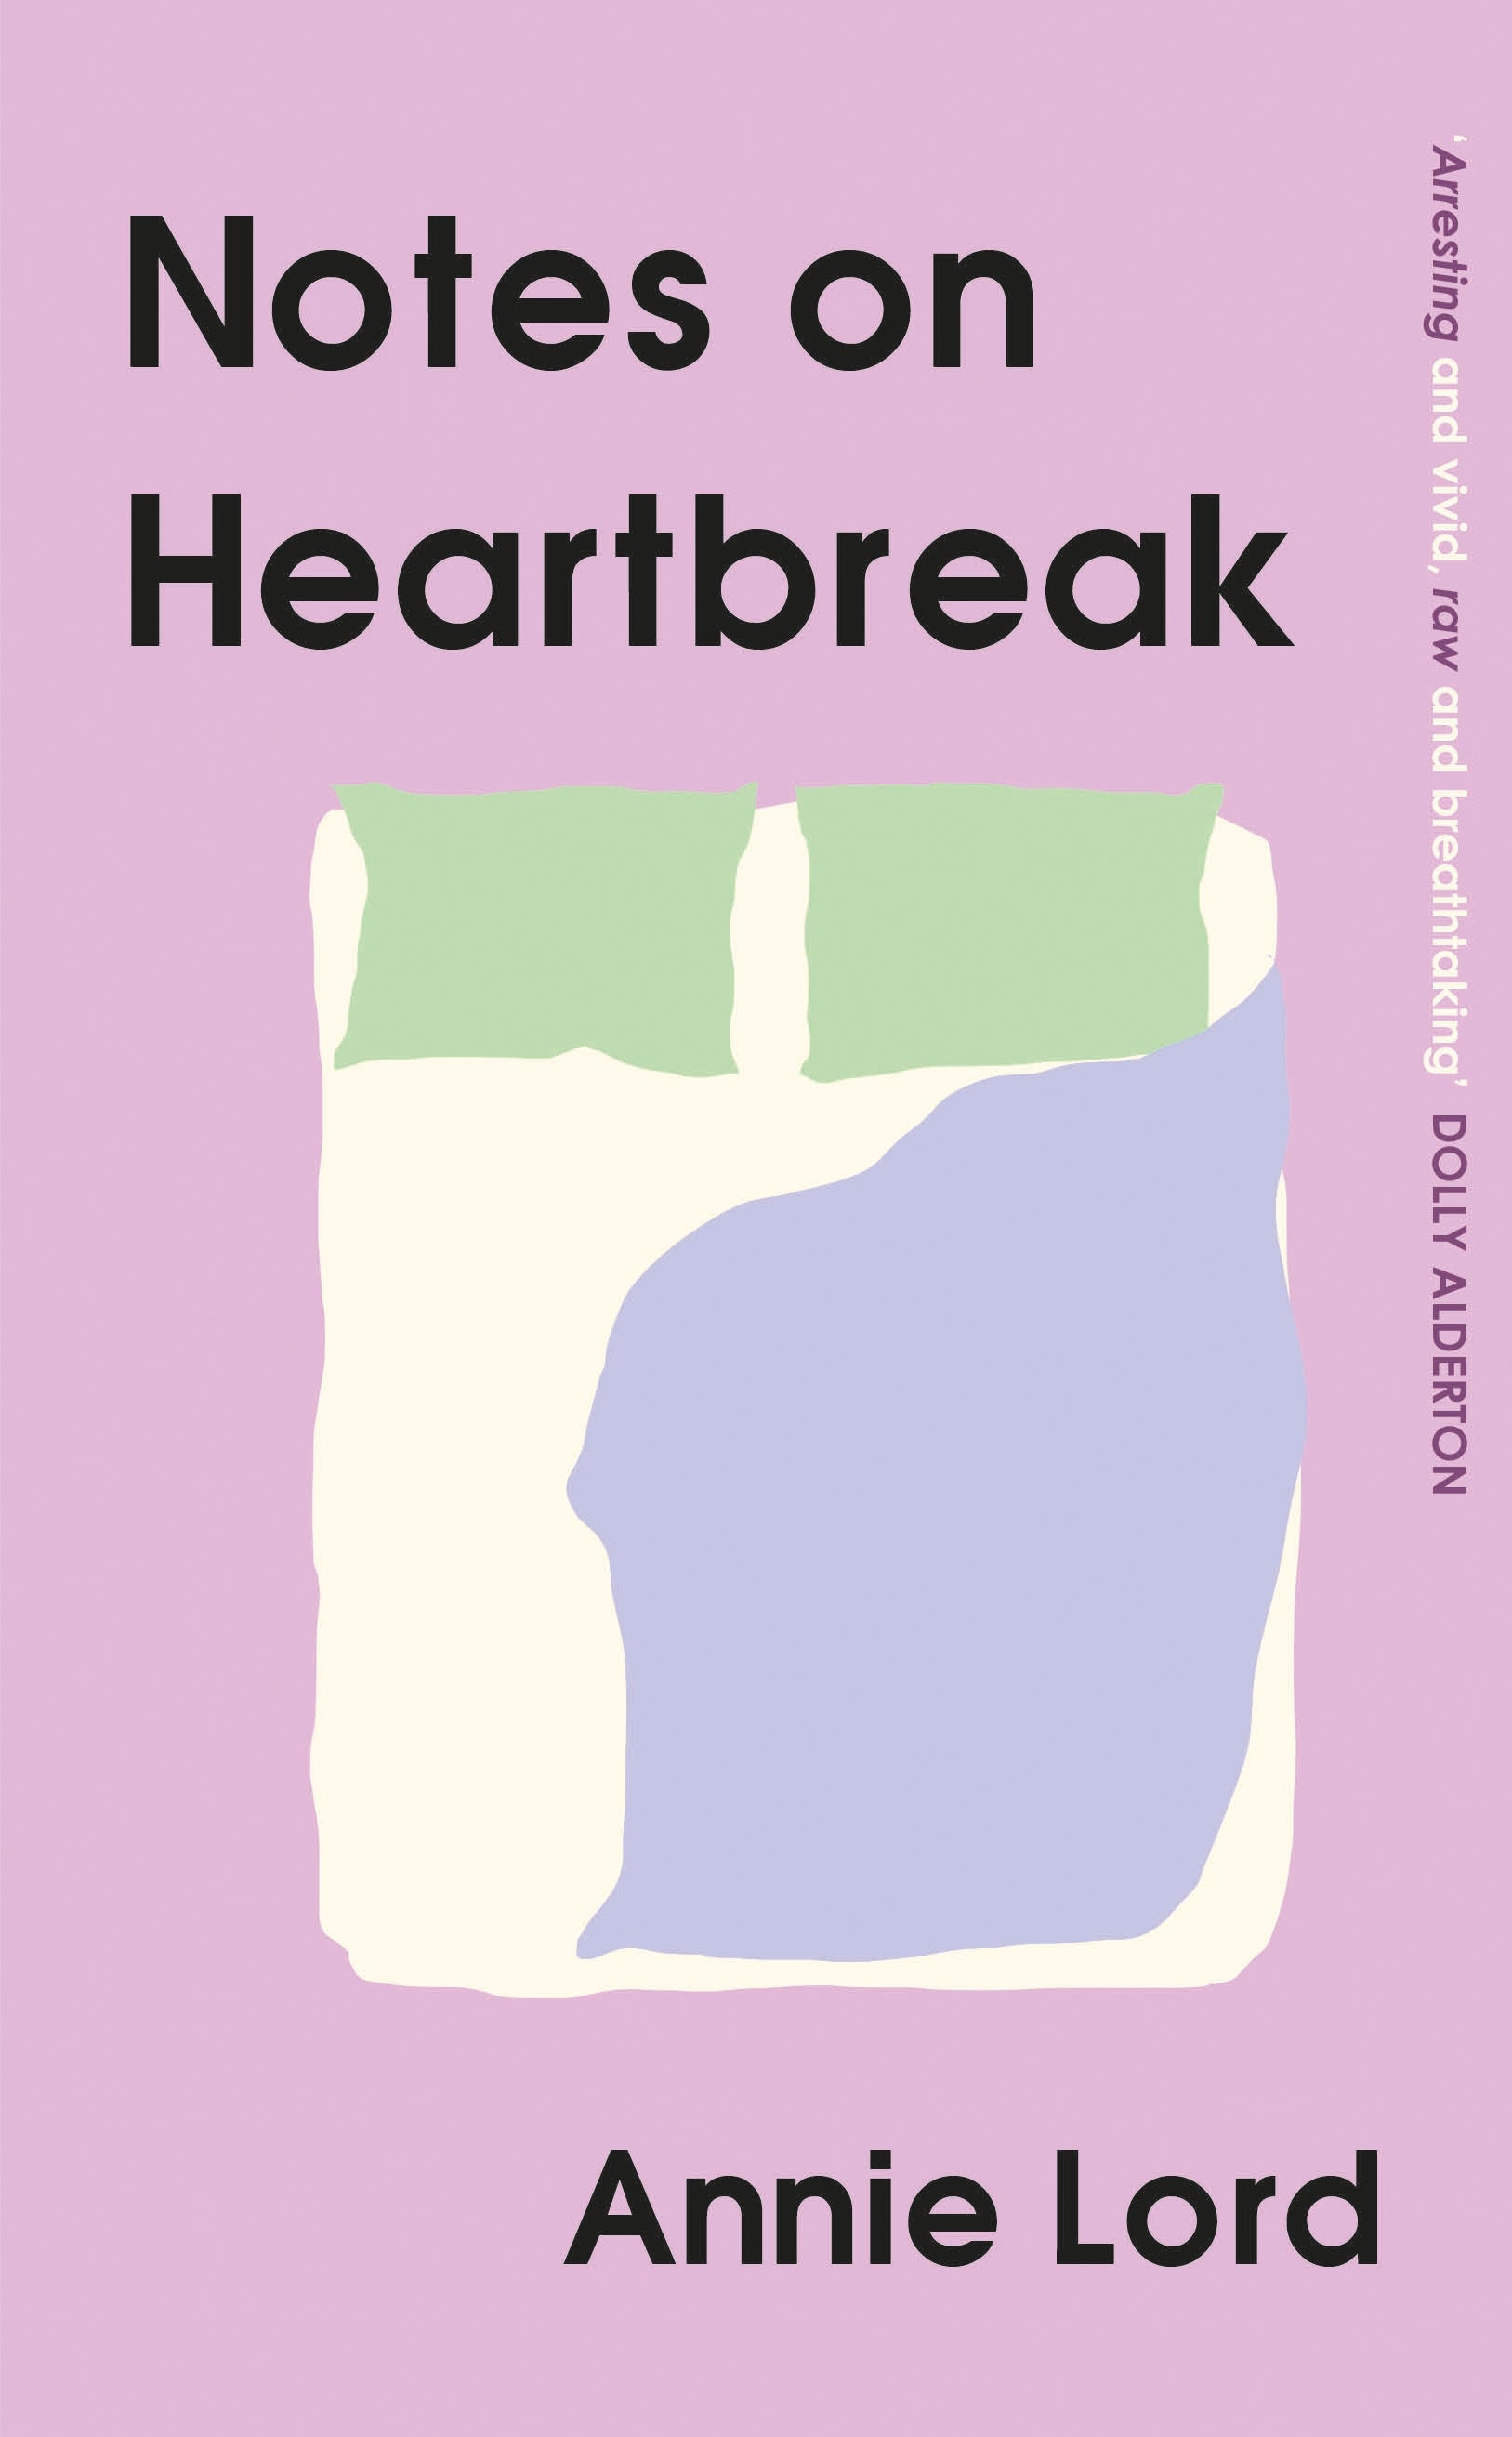 Annie Lord’s ‘Notes on Heartbreak’